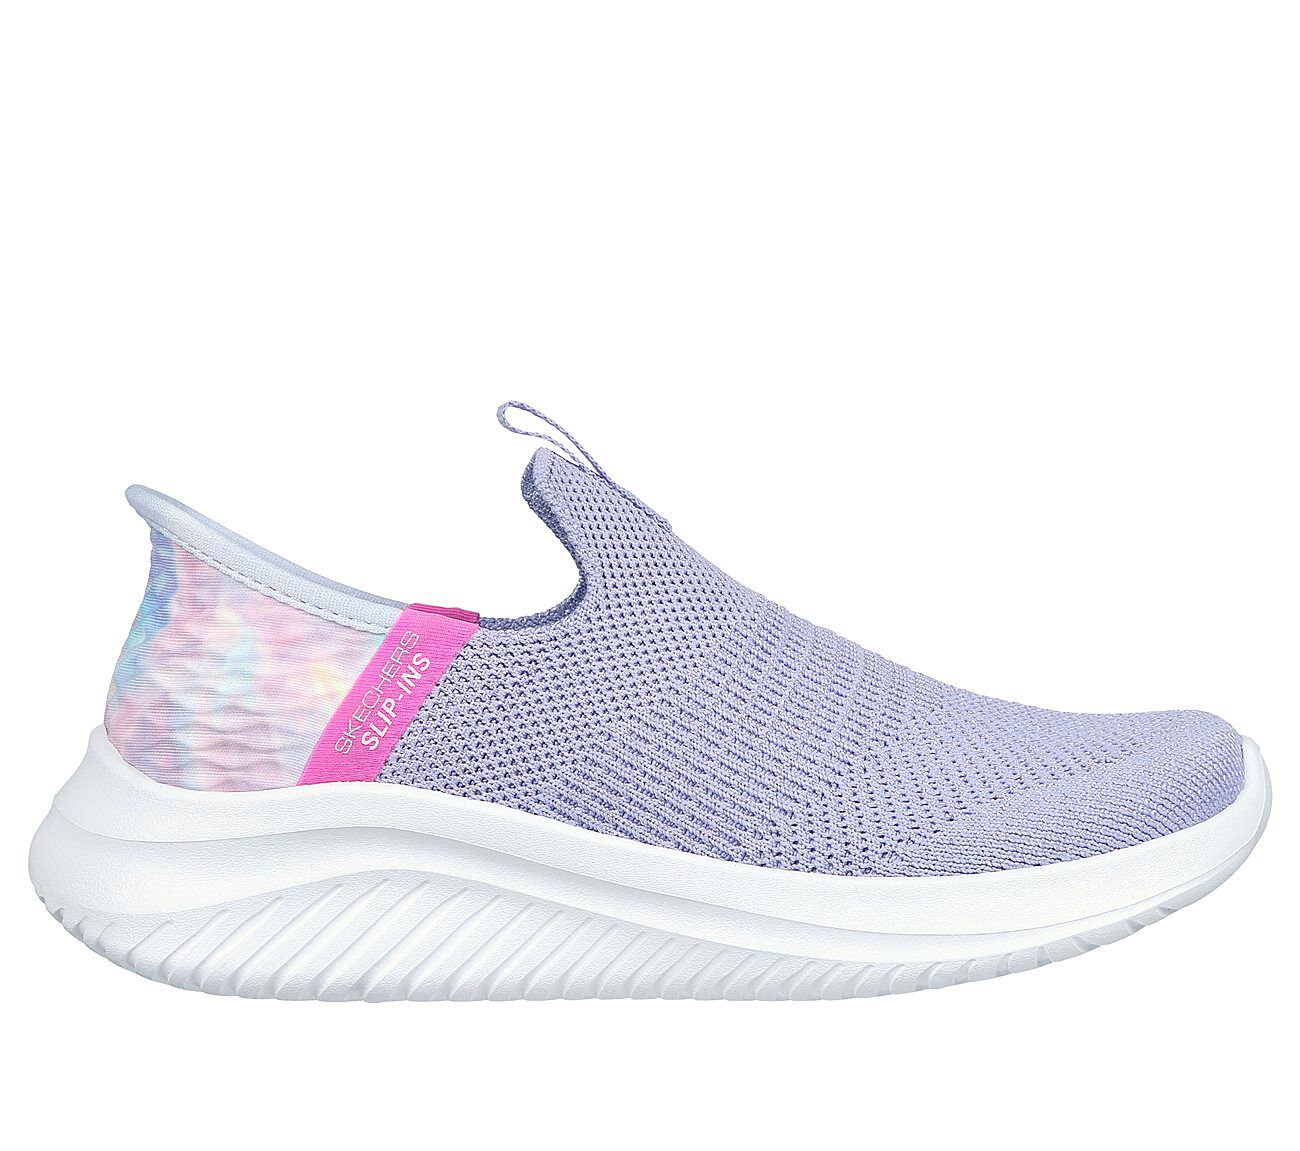 WGRY - Knit Air - Skechers D Lites 3.0 Air chunky trainers in white -  Skechers Skech - Cooled Women's Shoes White 12704